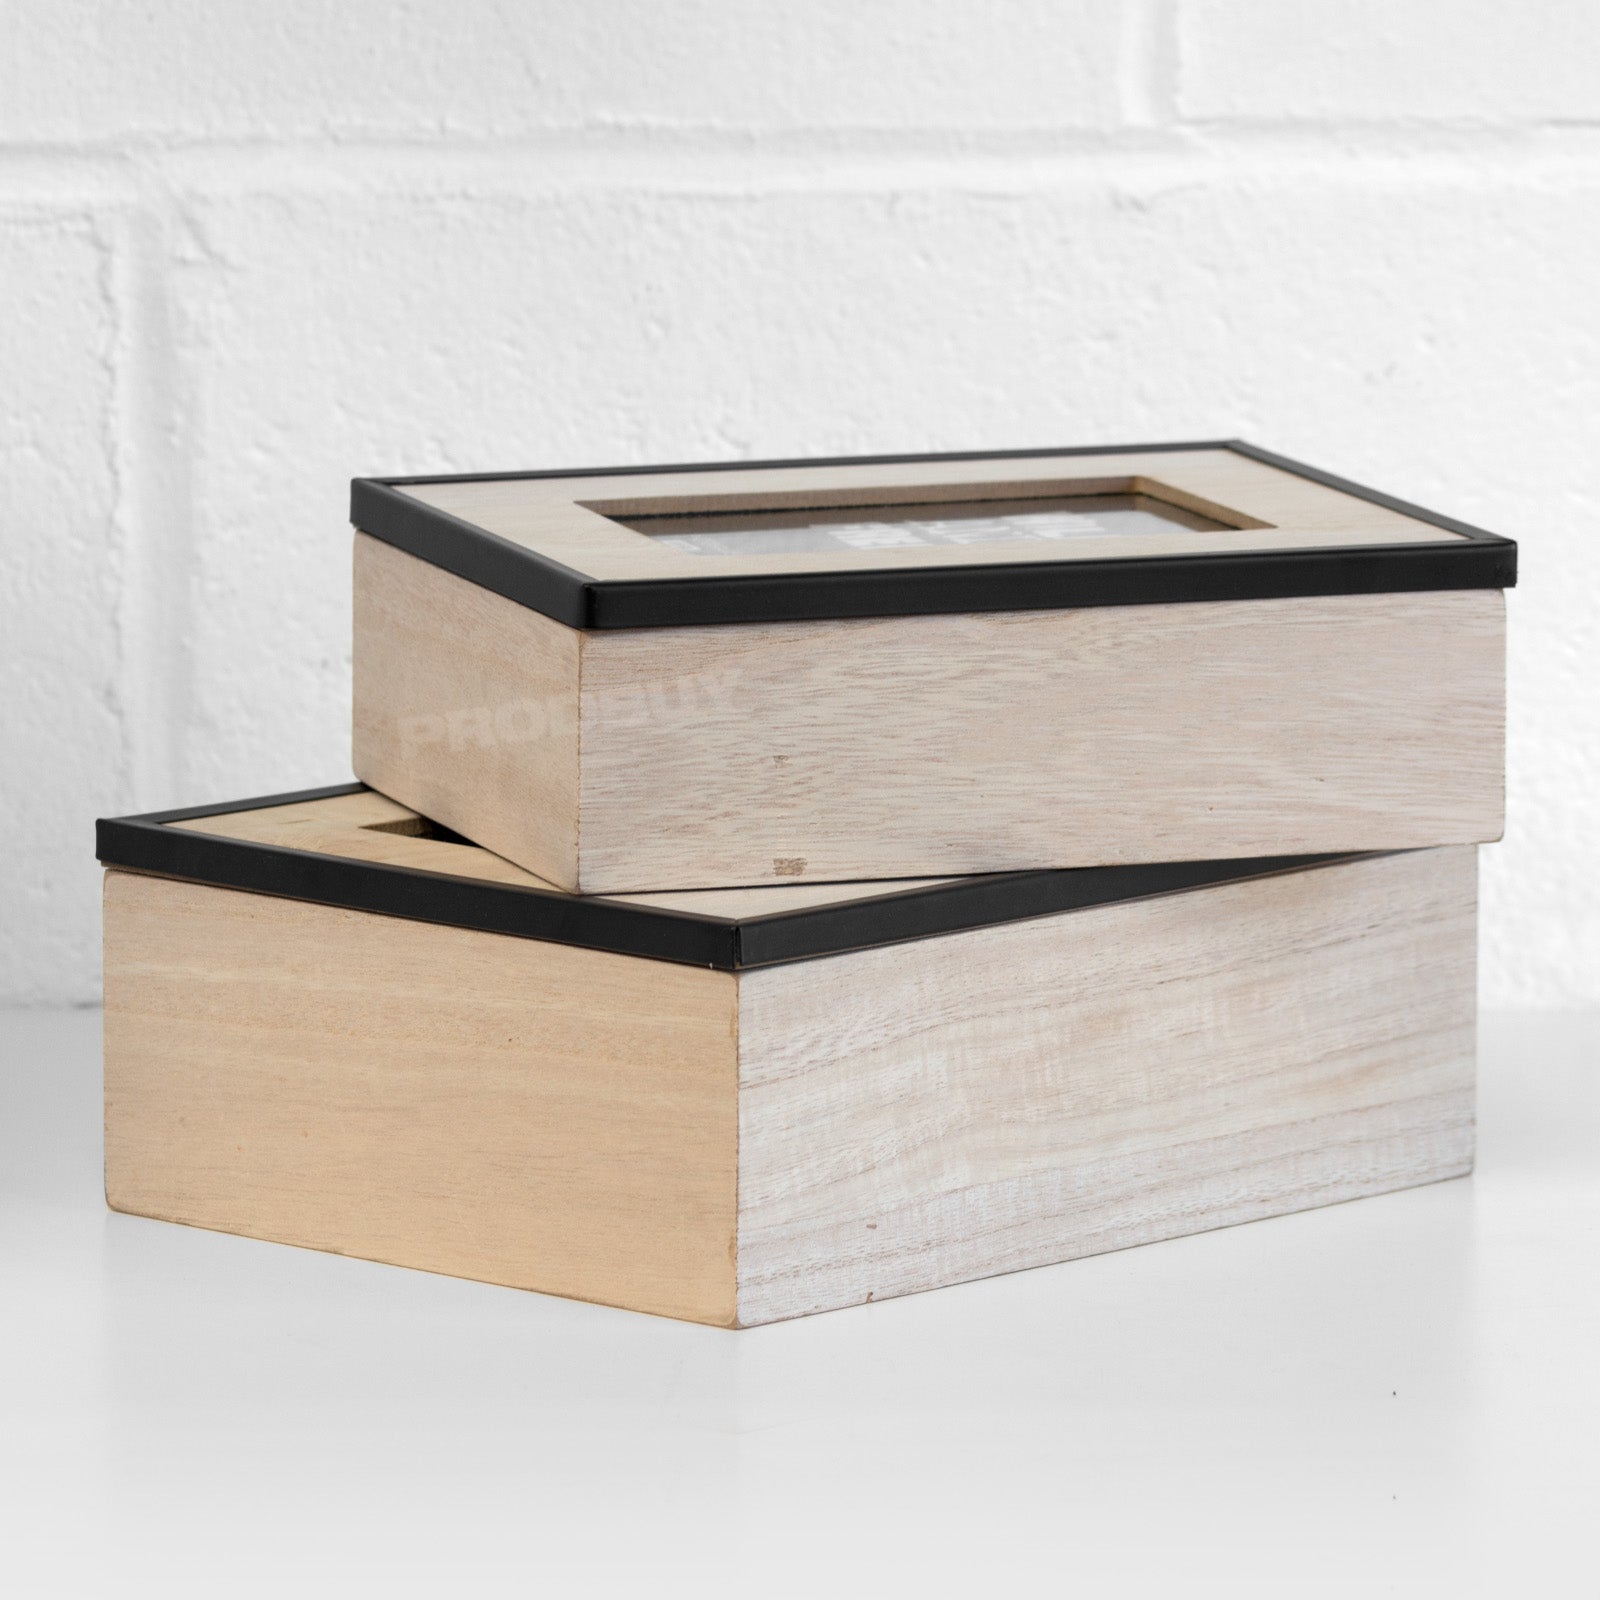 Wooden 4X6 Photo Storage Box With Lid Large - 5 x 7 Inch Photograph